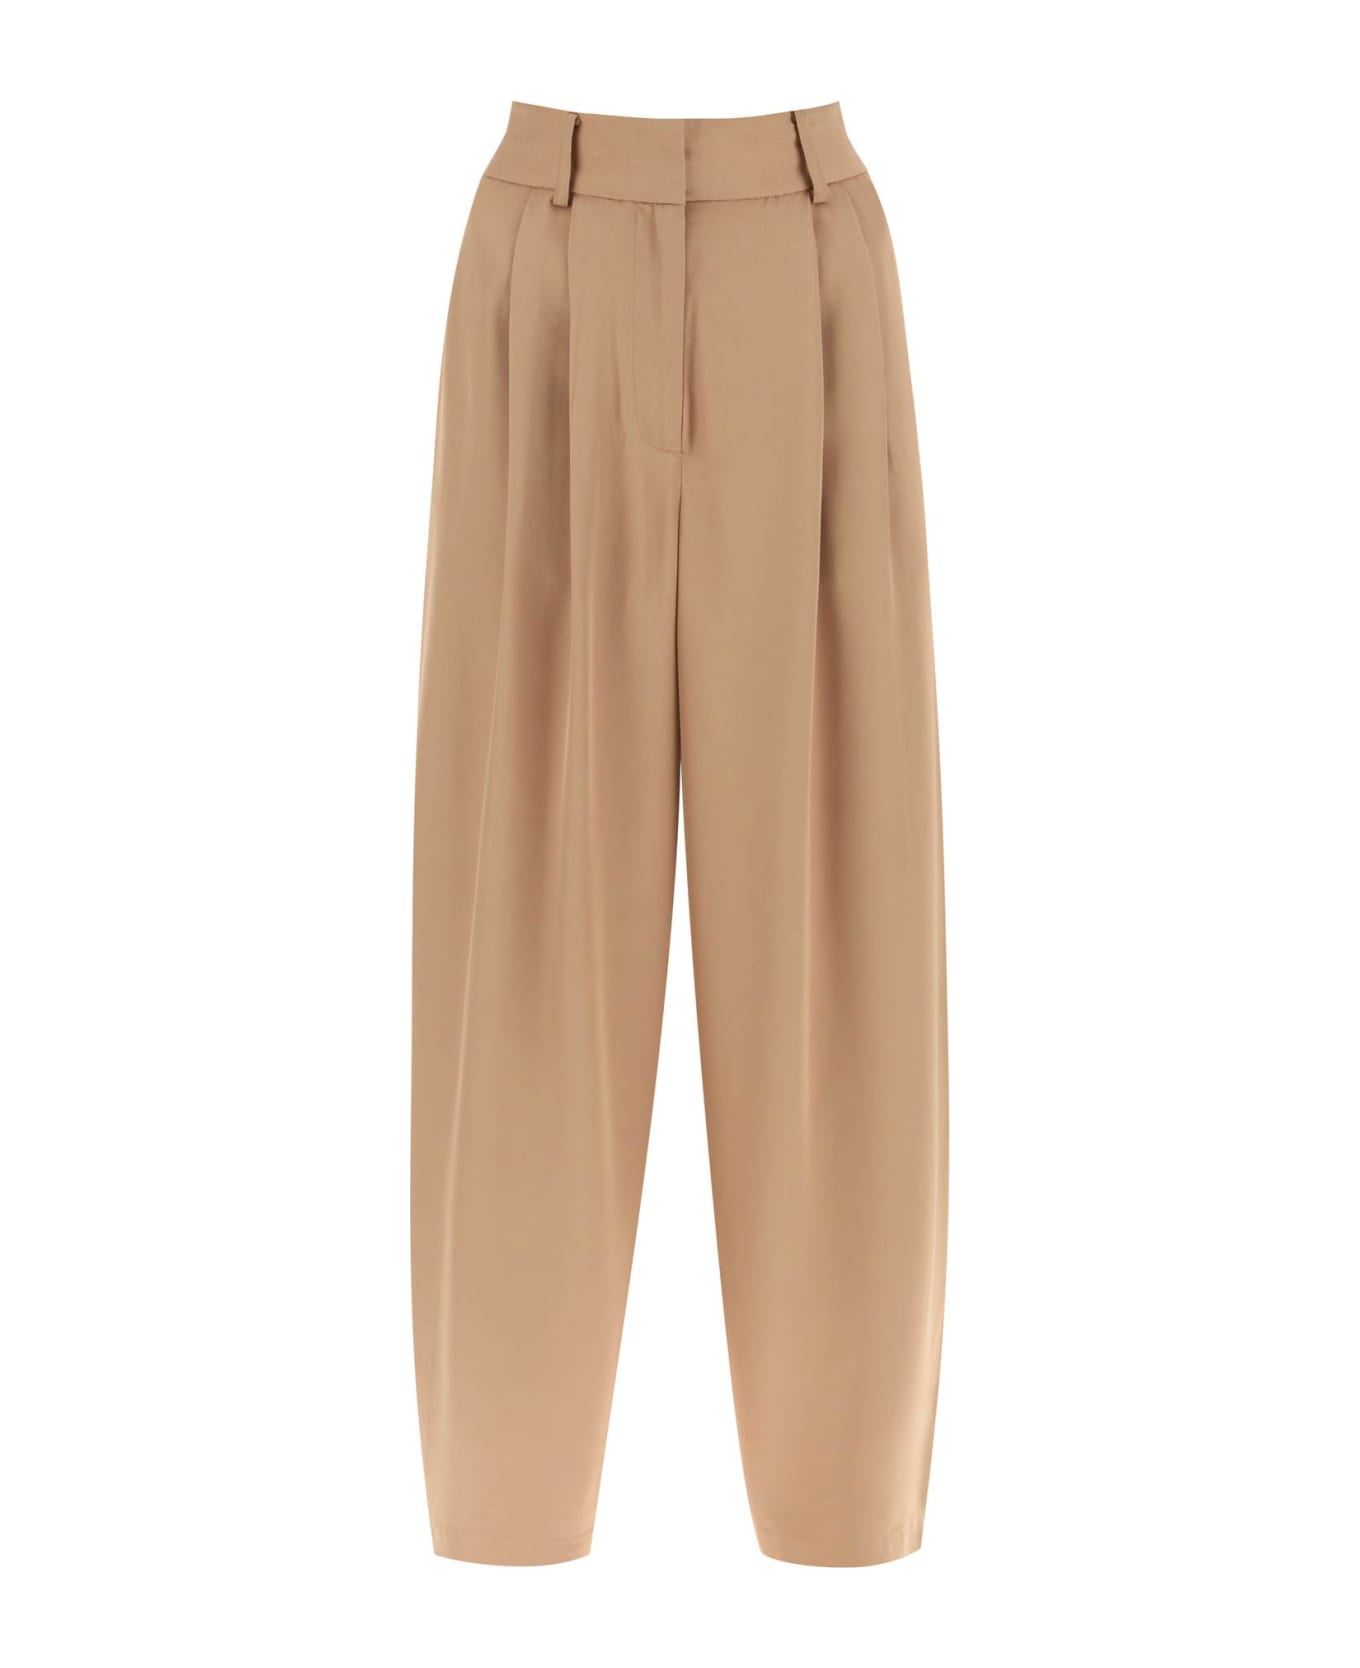 By Malene Birger Piscali Double Pleat Fluid Pants - TOBACCO BROWN (Brown)